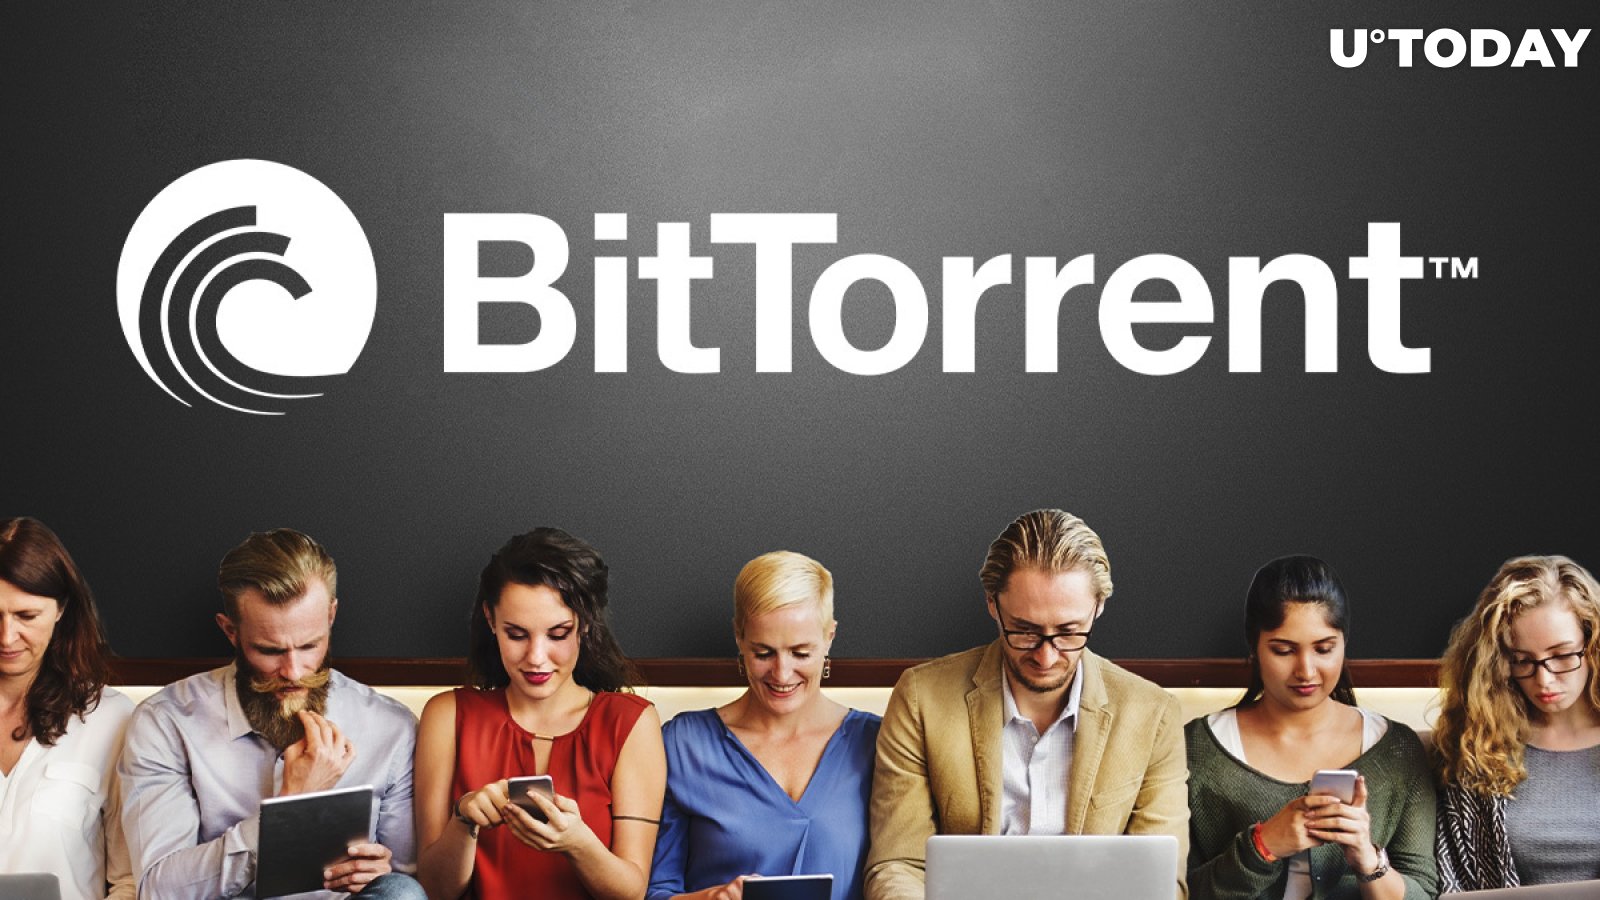 BitTorrent Product Usage 30% Up, DLive DAU Doubled. What is Driving Growth?